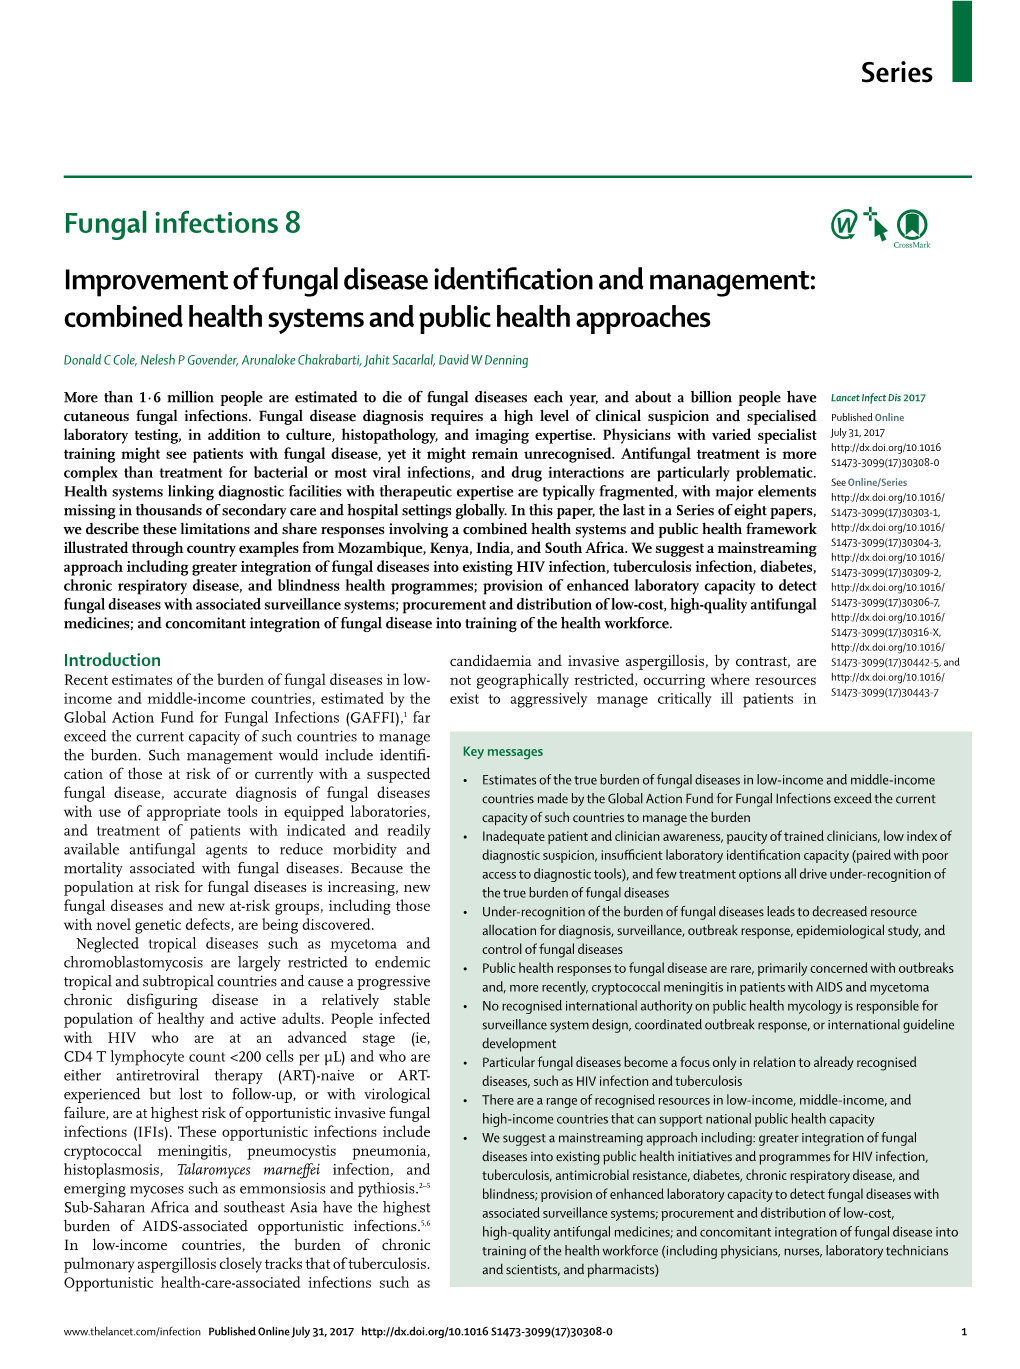 Improvement of Fungal Disease Identification and Management: Combined Health Systems and Public Health Approaches